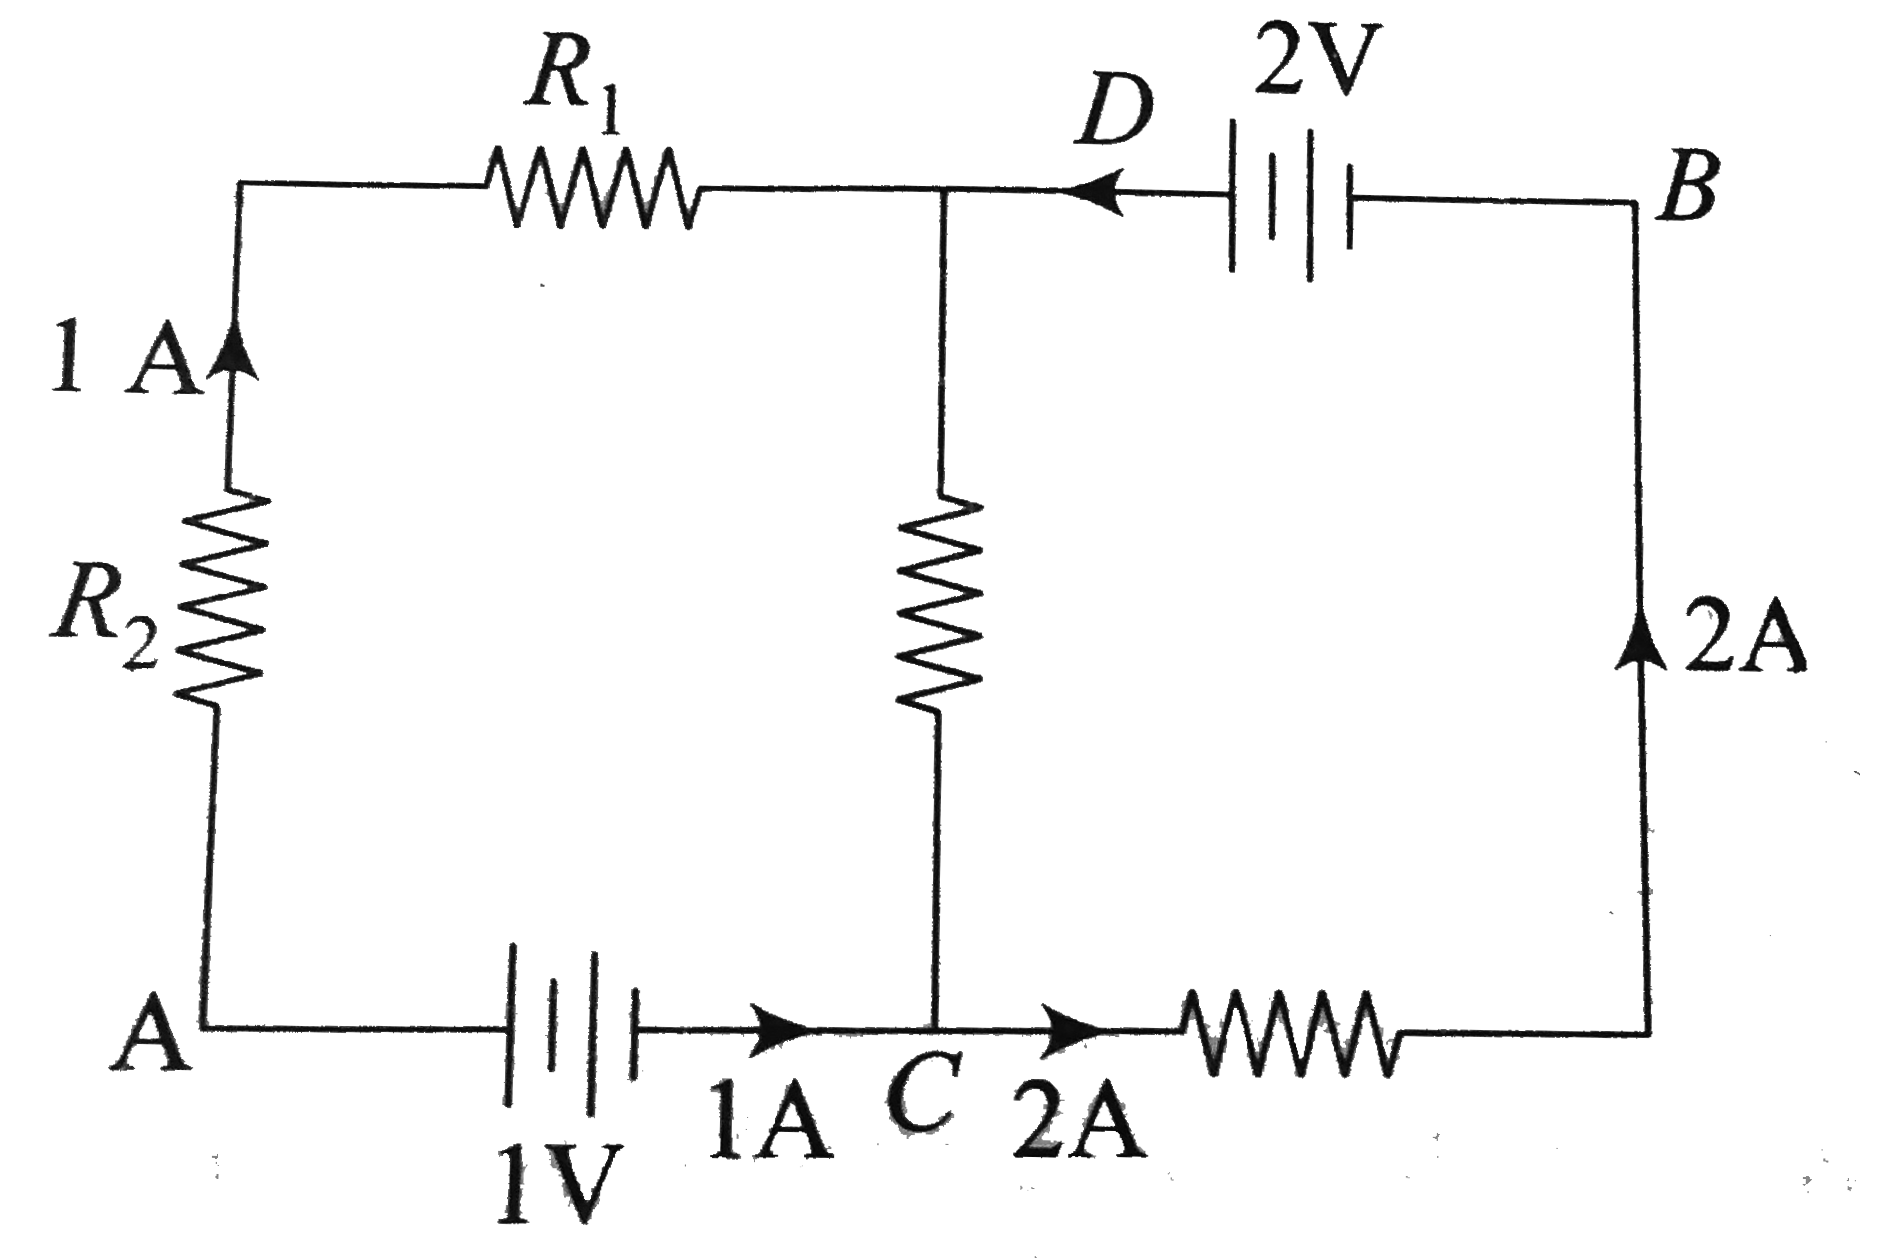 In the circuit shown in the figure, if potentail at point A is taken to be zero, the potential at point B is